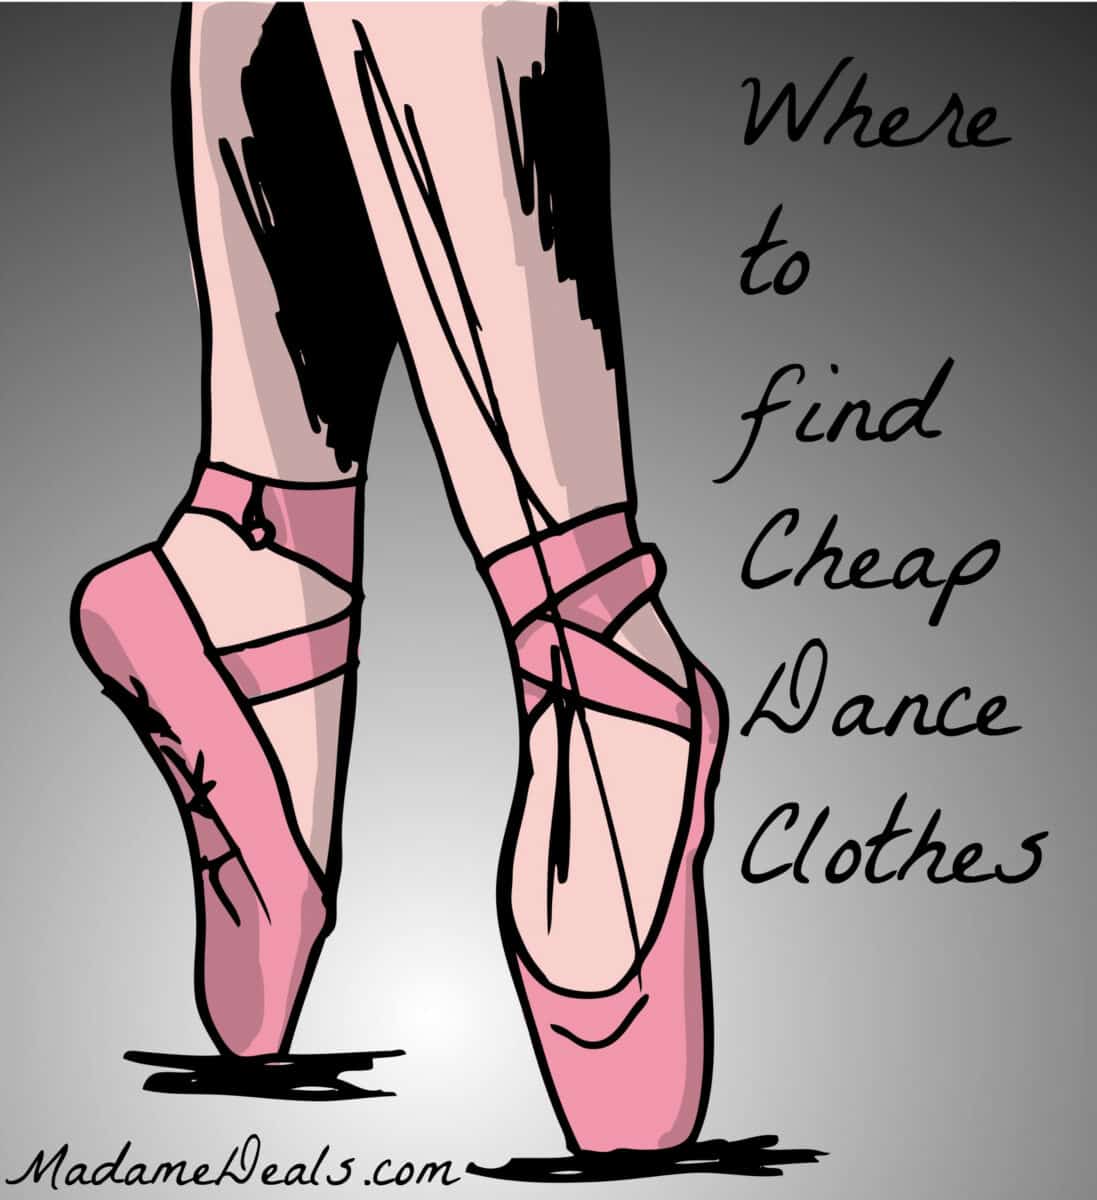 Where to Get Cheap Dance Clothes - Real Advice Gal